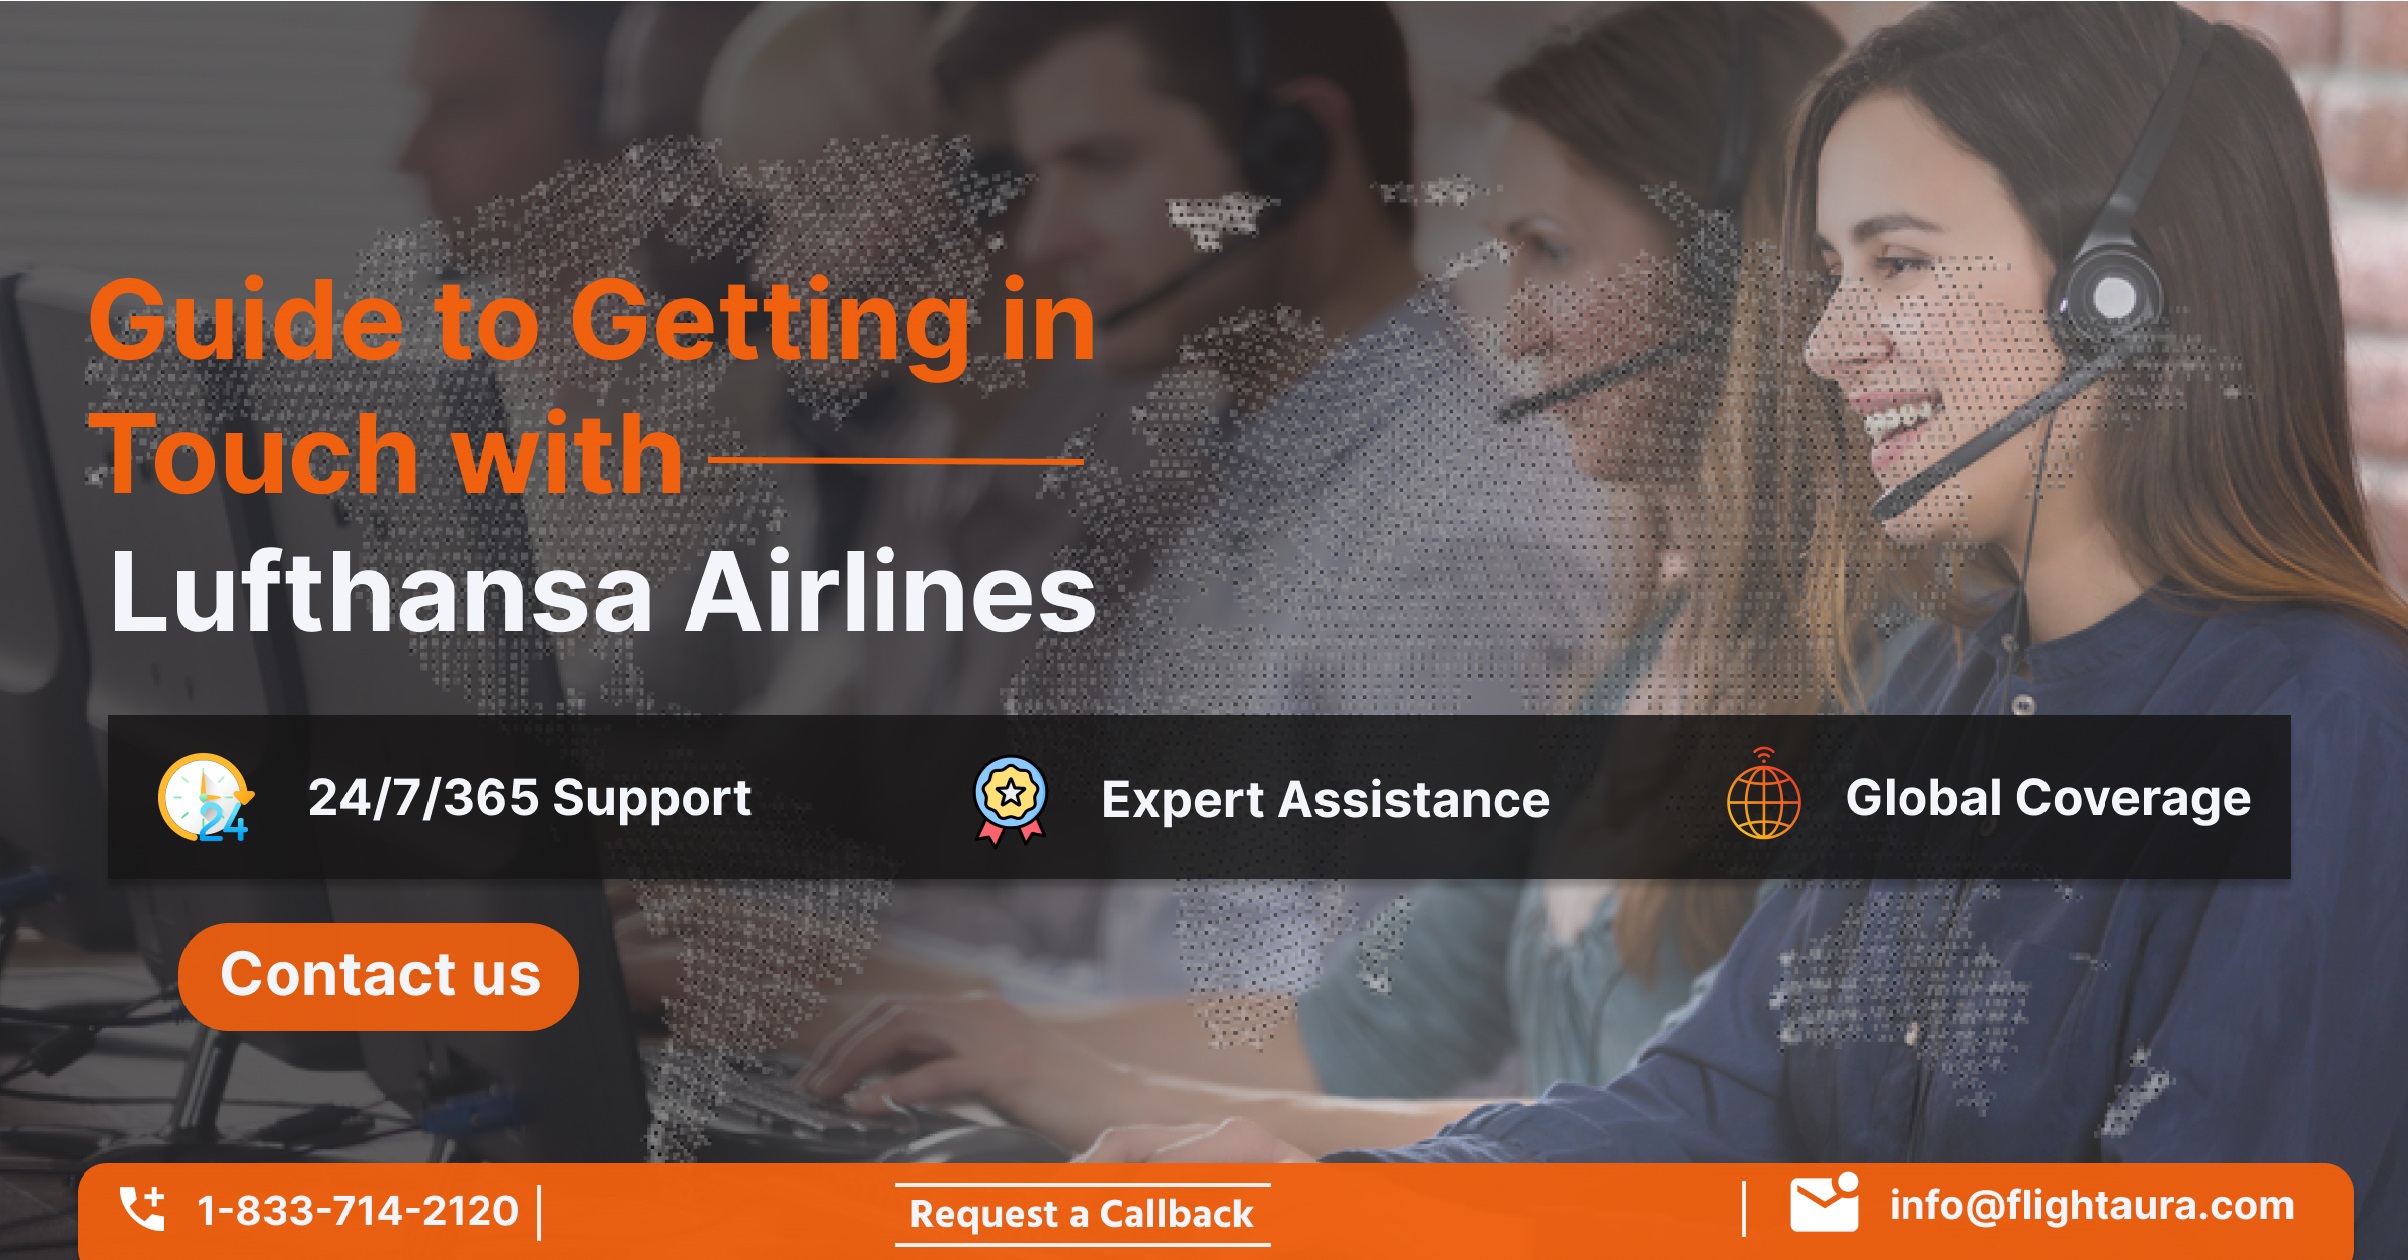 Complete guide to getting in touch with Lufthansa - Lufthansa Customer Care